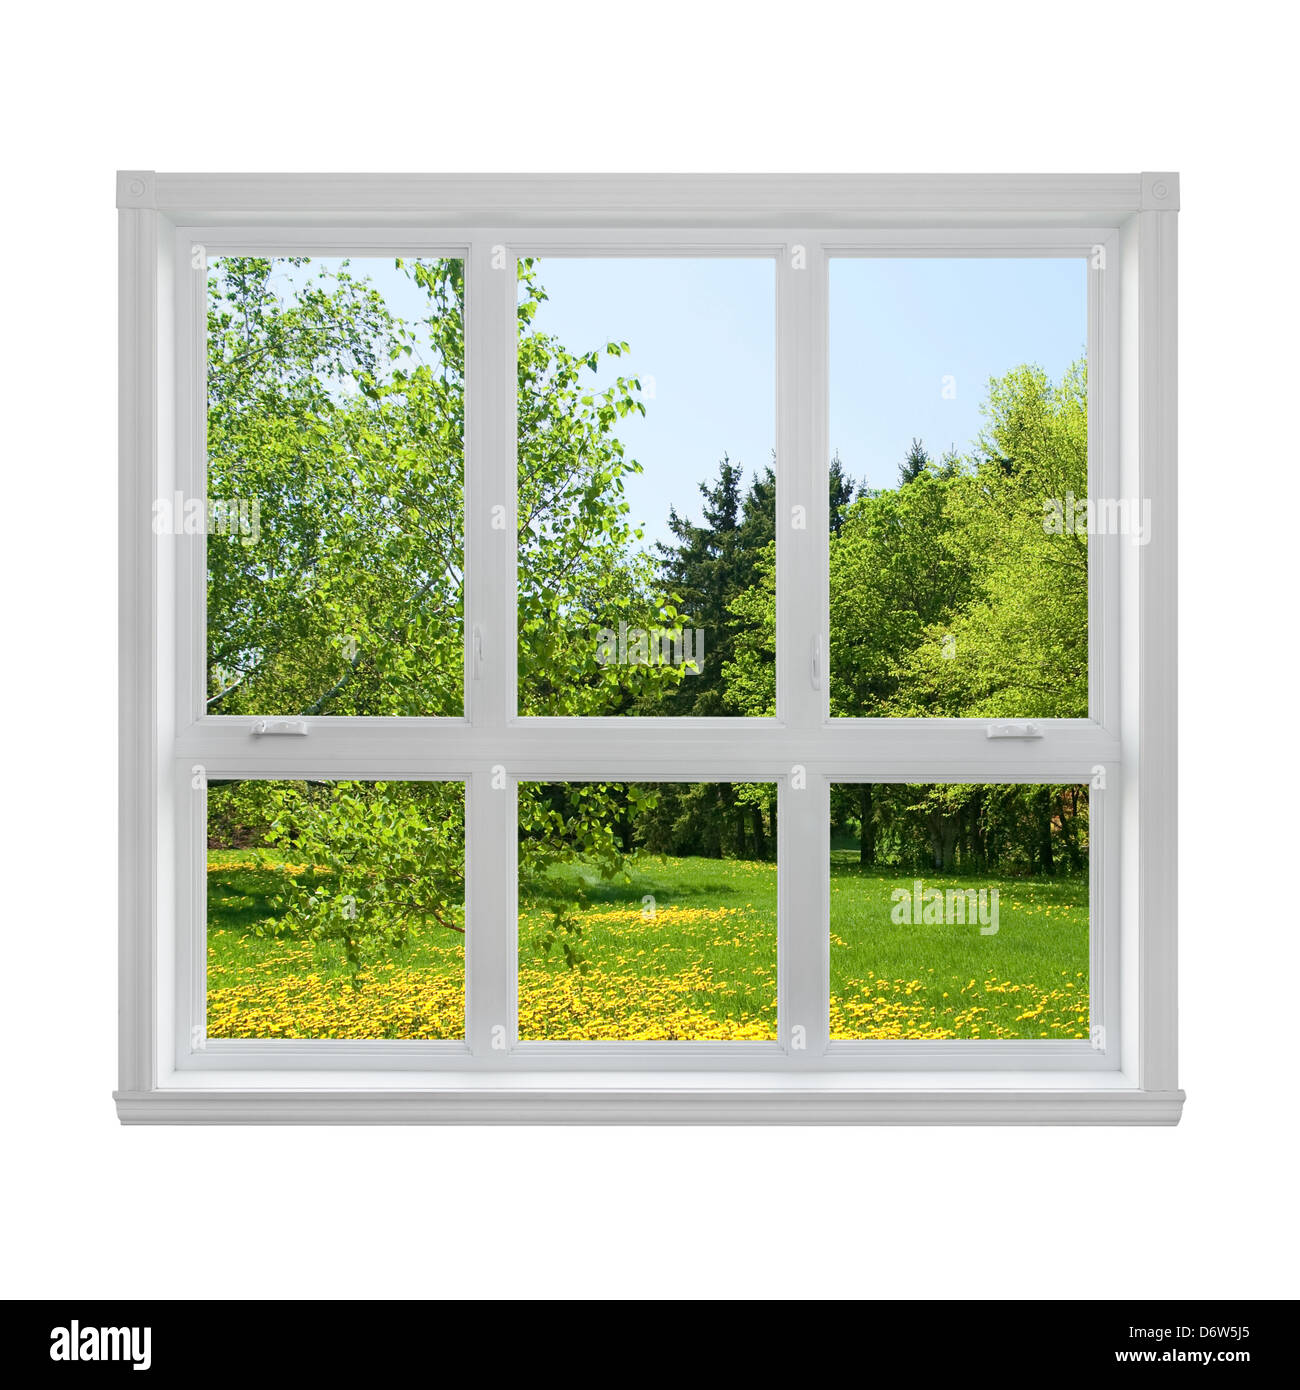 Spring dandelion lawn and green trees seen through the window. Stock Photo